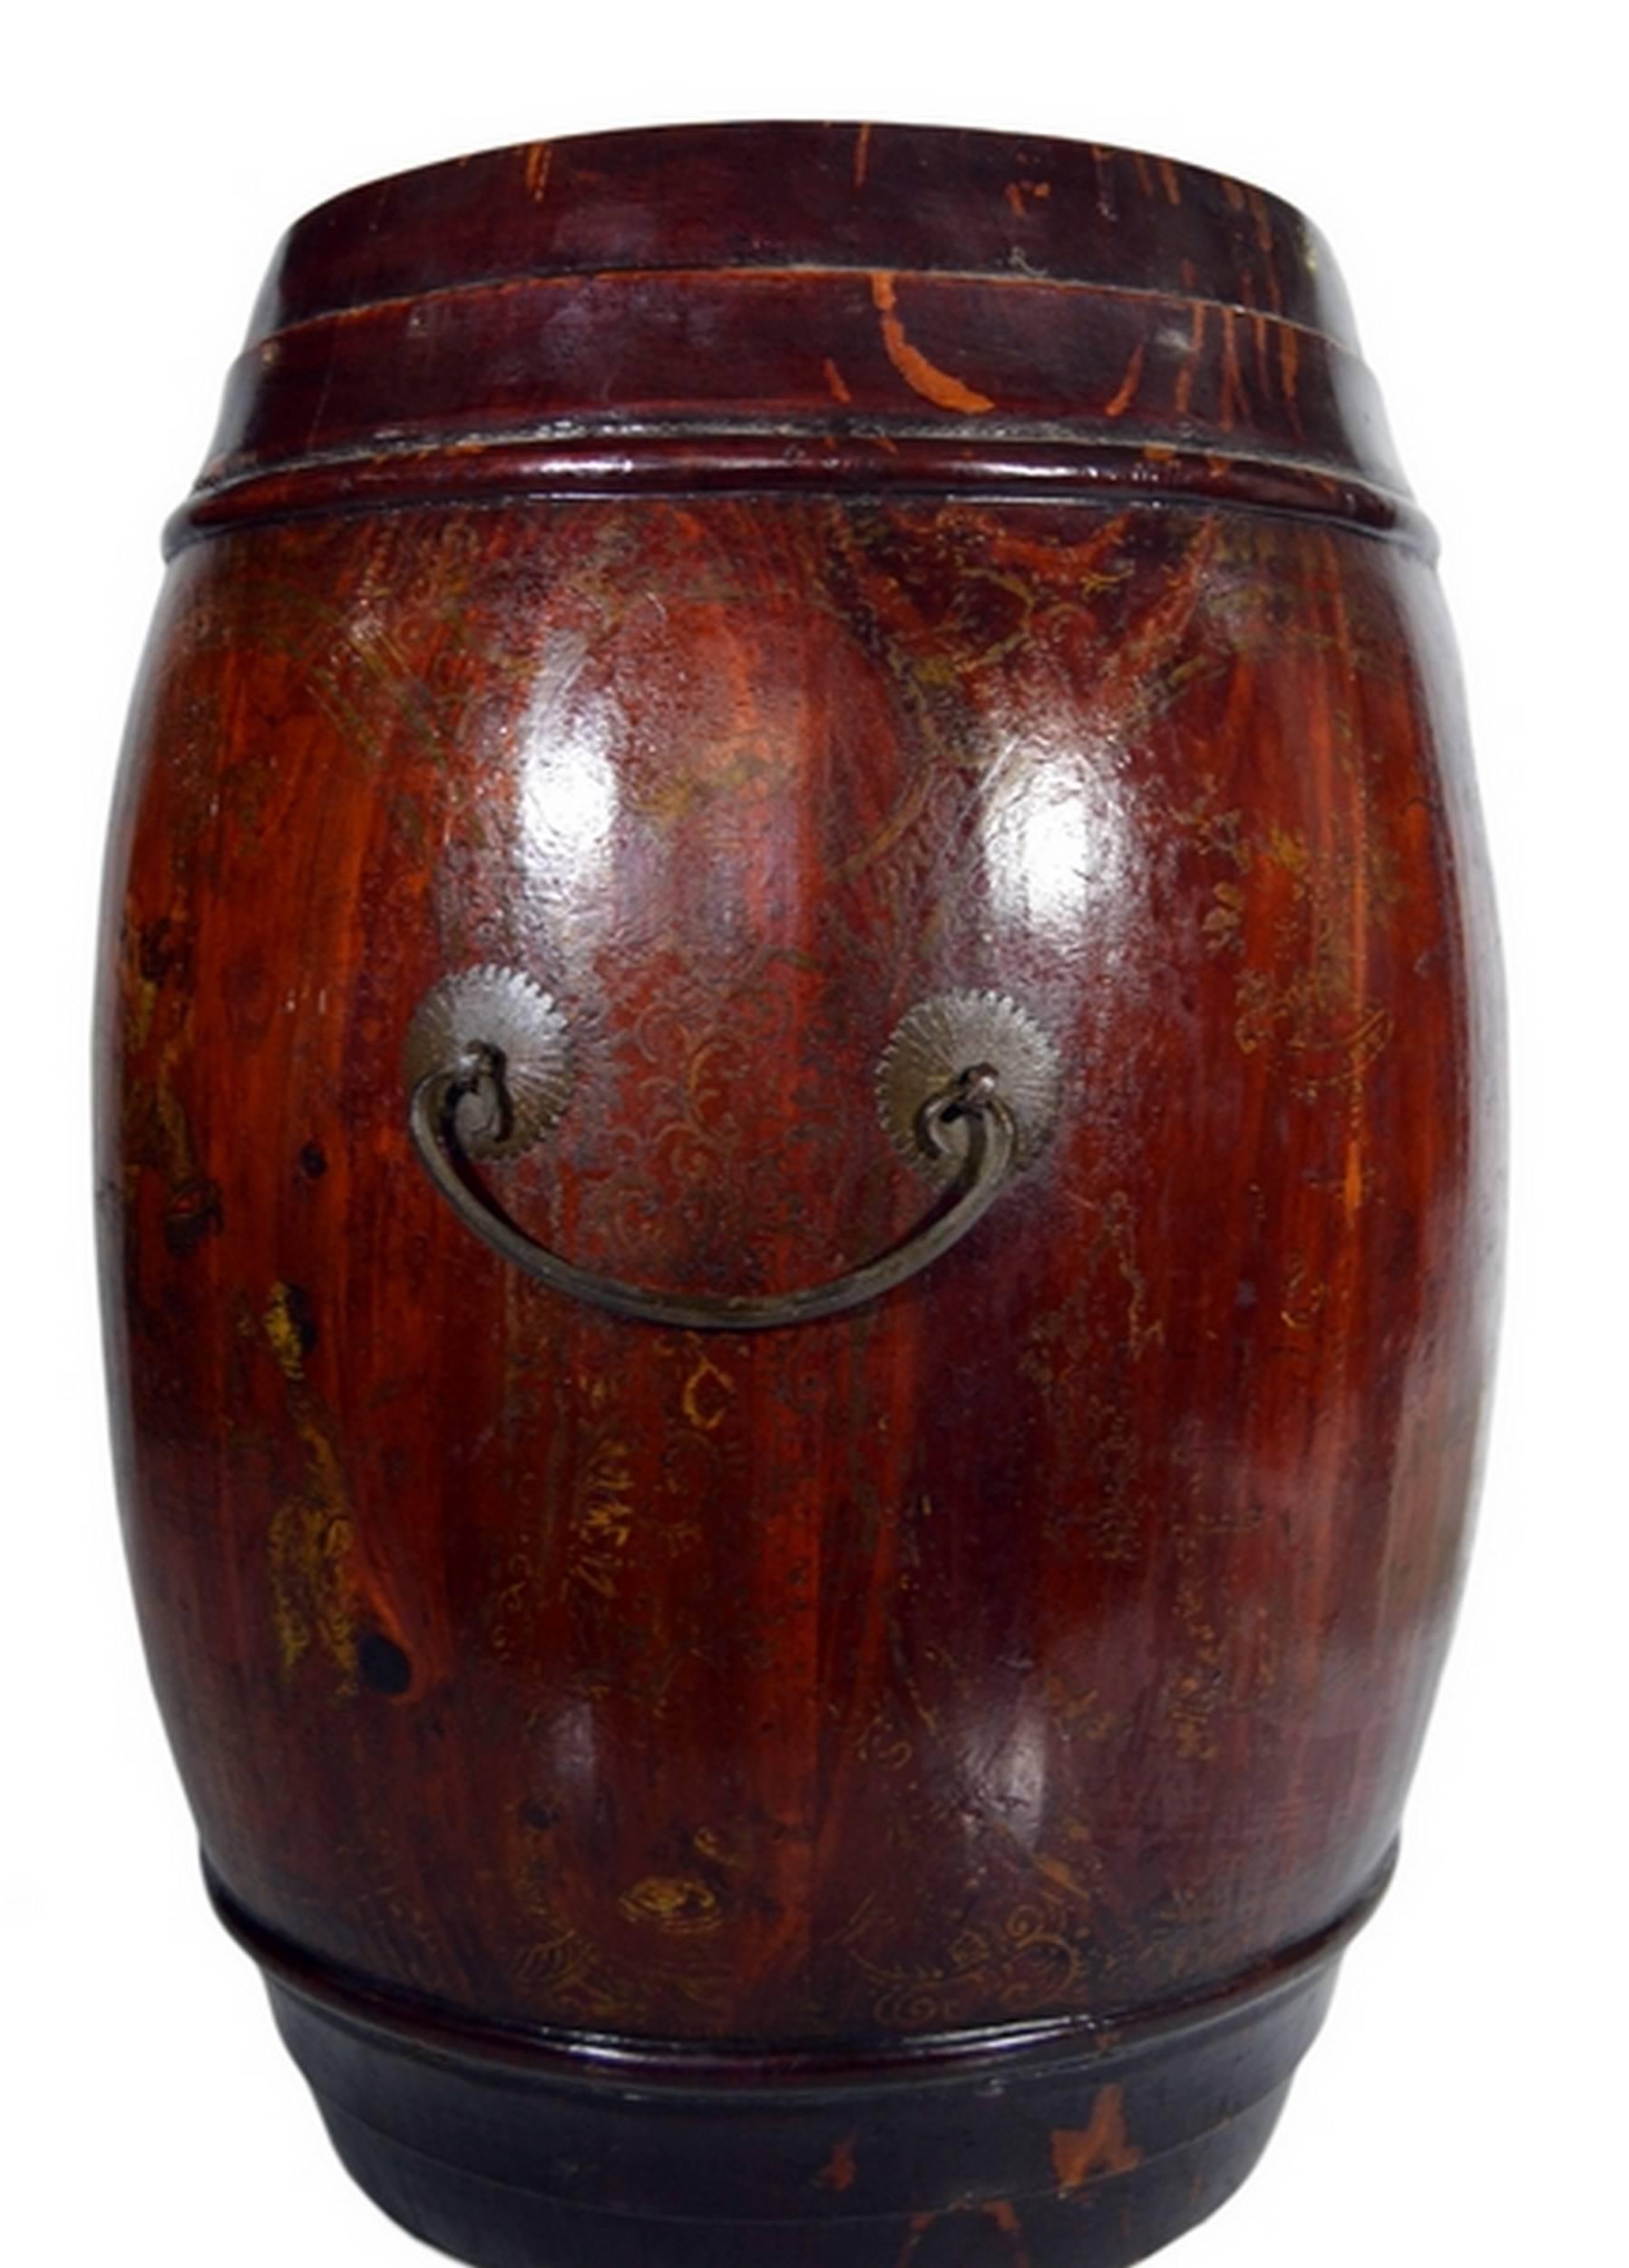 A Chinese 19th century grain barrel basket made with varnished wood. This barrel is made of curved varnished wood planks. The top and the bottom are reinforced thanks to two wood circles. The sides features large round metallic handles, fixed to the